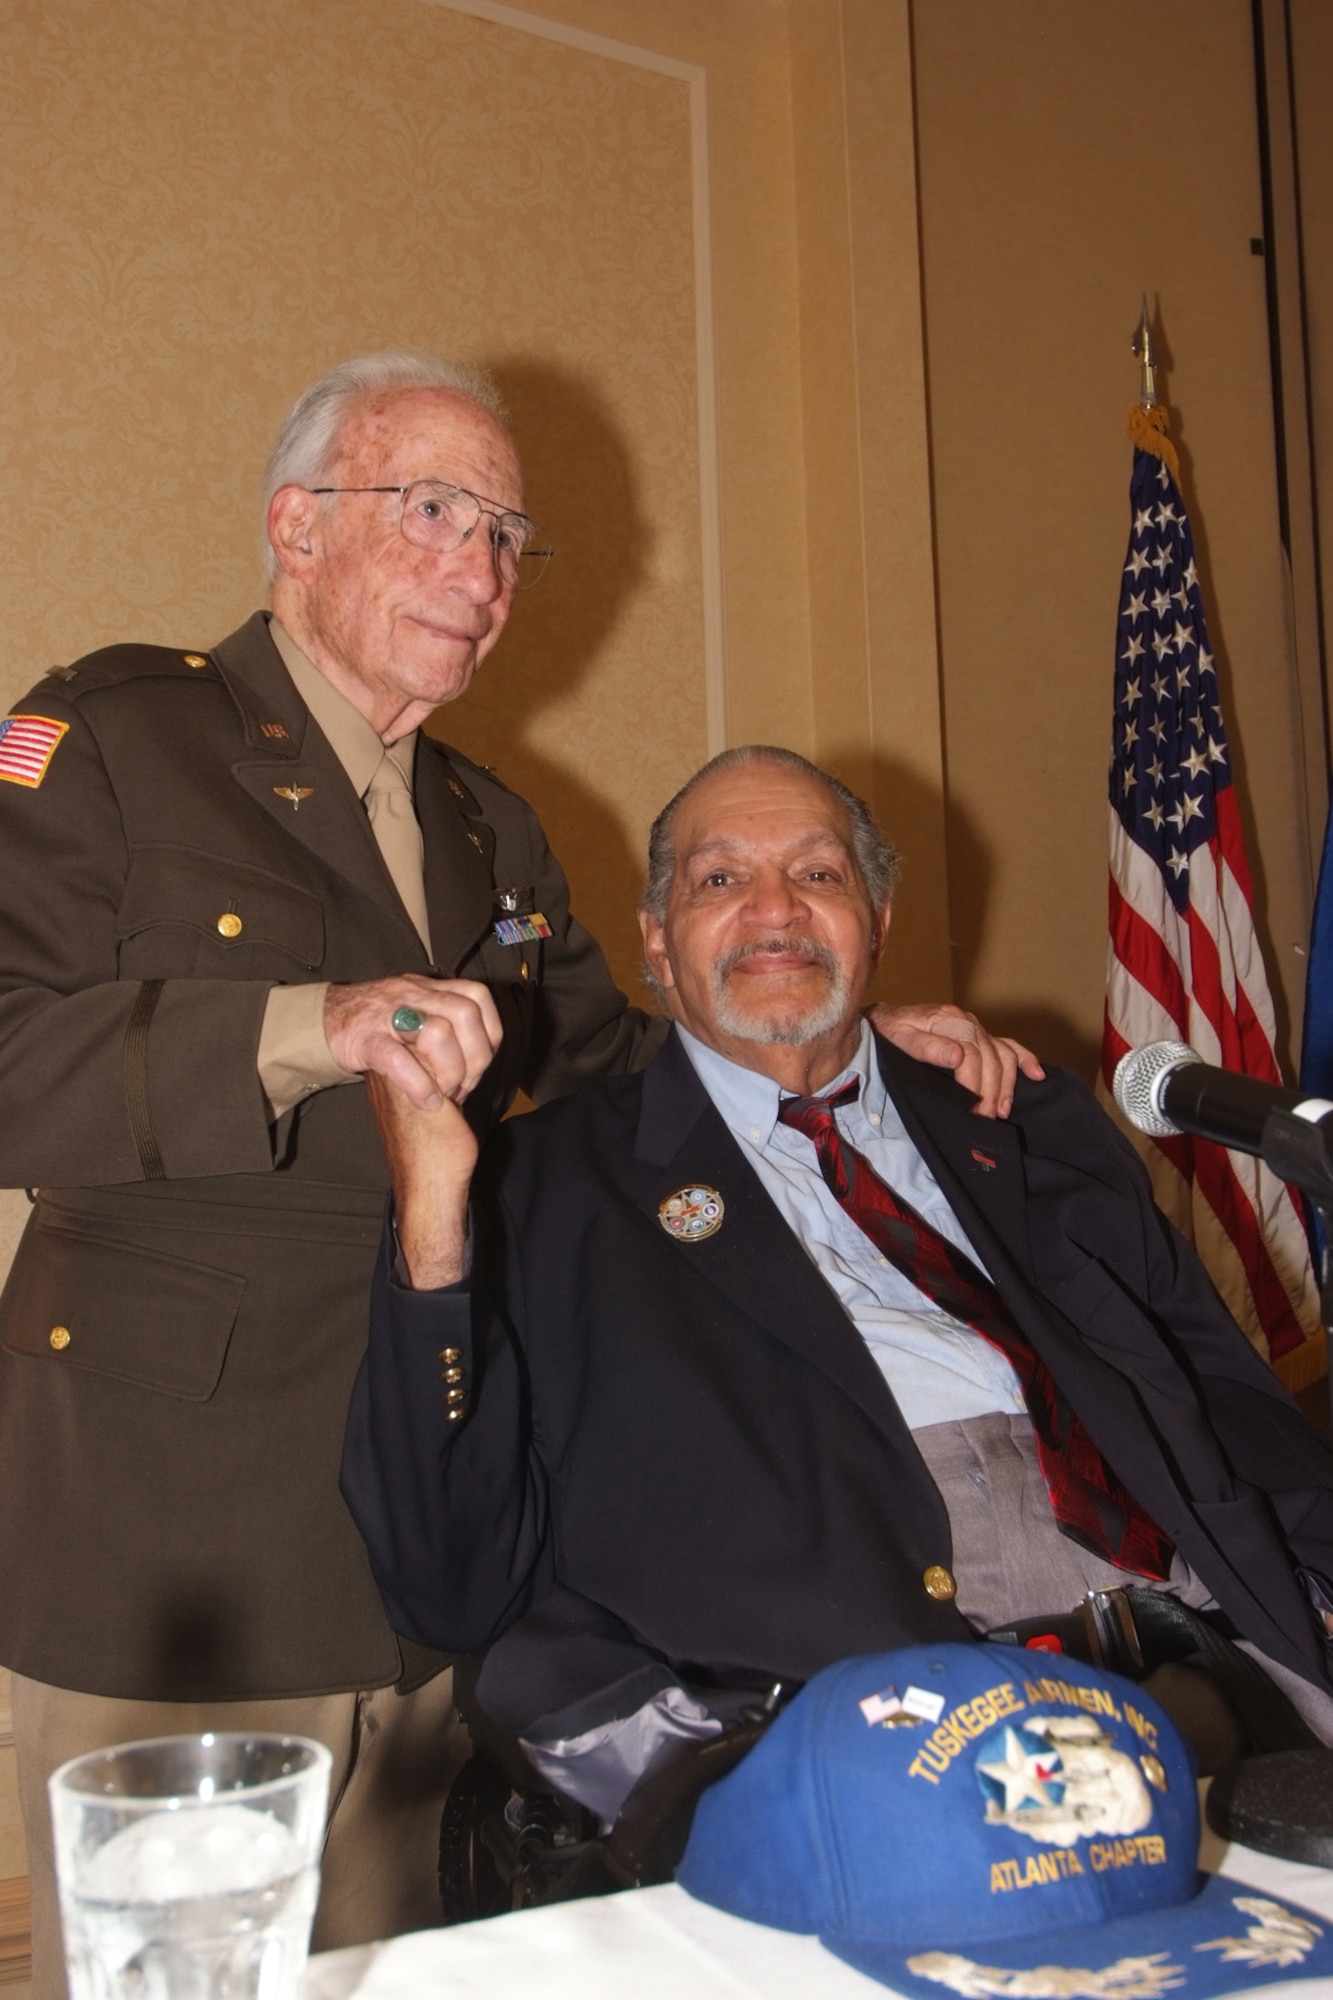 Former Flight Officer Herbert Heilbrun (left) and Tuskegee Airman Ray Williams share a moment after telling their history to over 350 airmen during the Air Force Reserve Command Human Resources Development Council conference  Oct 24-27, 2010 in Atlanta.  Heilbrun was a B-17 bomber pilot, escorted by Williams, a P-51 pilot.  The pair were reunited  50 years after their flights, only to discover that they went to school together 15 years before their military service.  (U.S. Air Force photo/Tech Sgt. Joe Zuccaro)